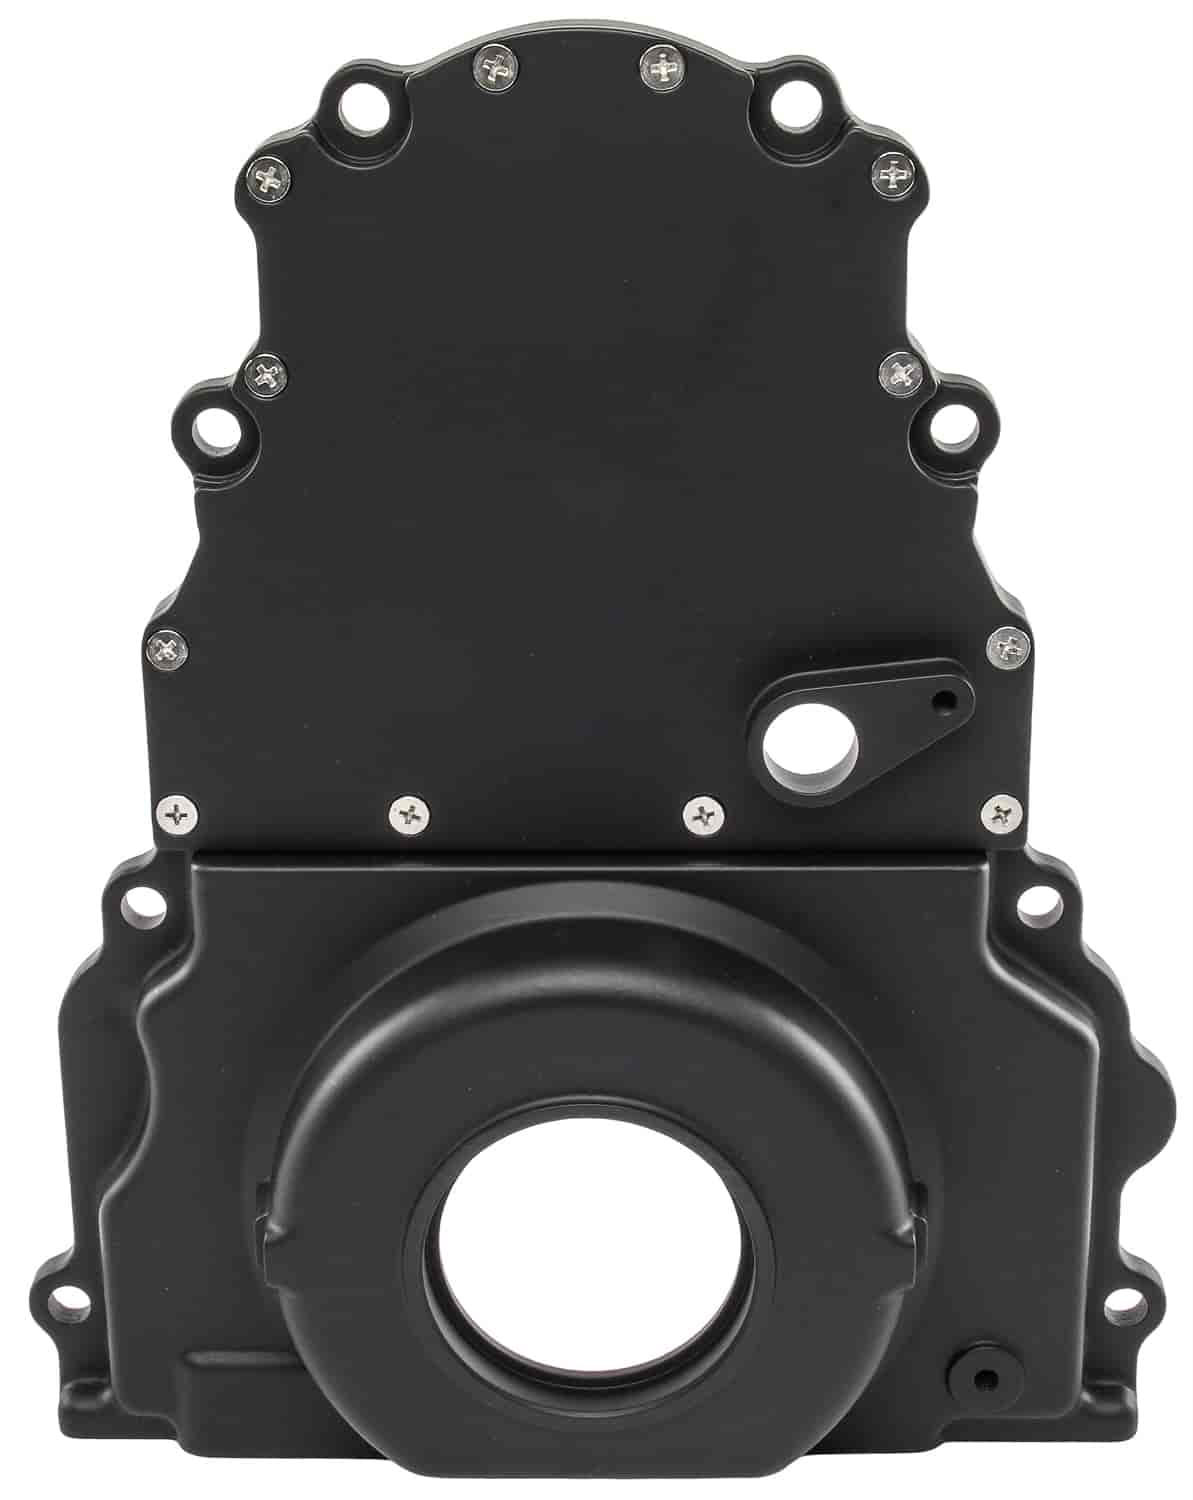 GM LS Timing Cover for GM LS Engines up to Gen IV with Front Mounted Cam Sensors